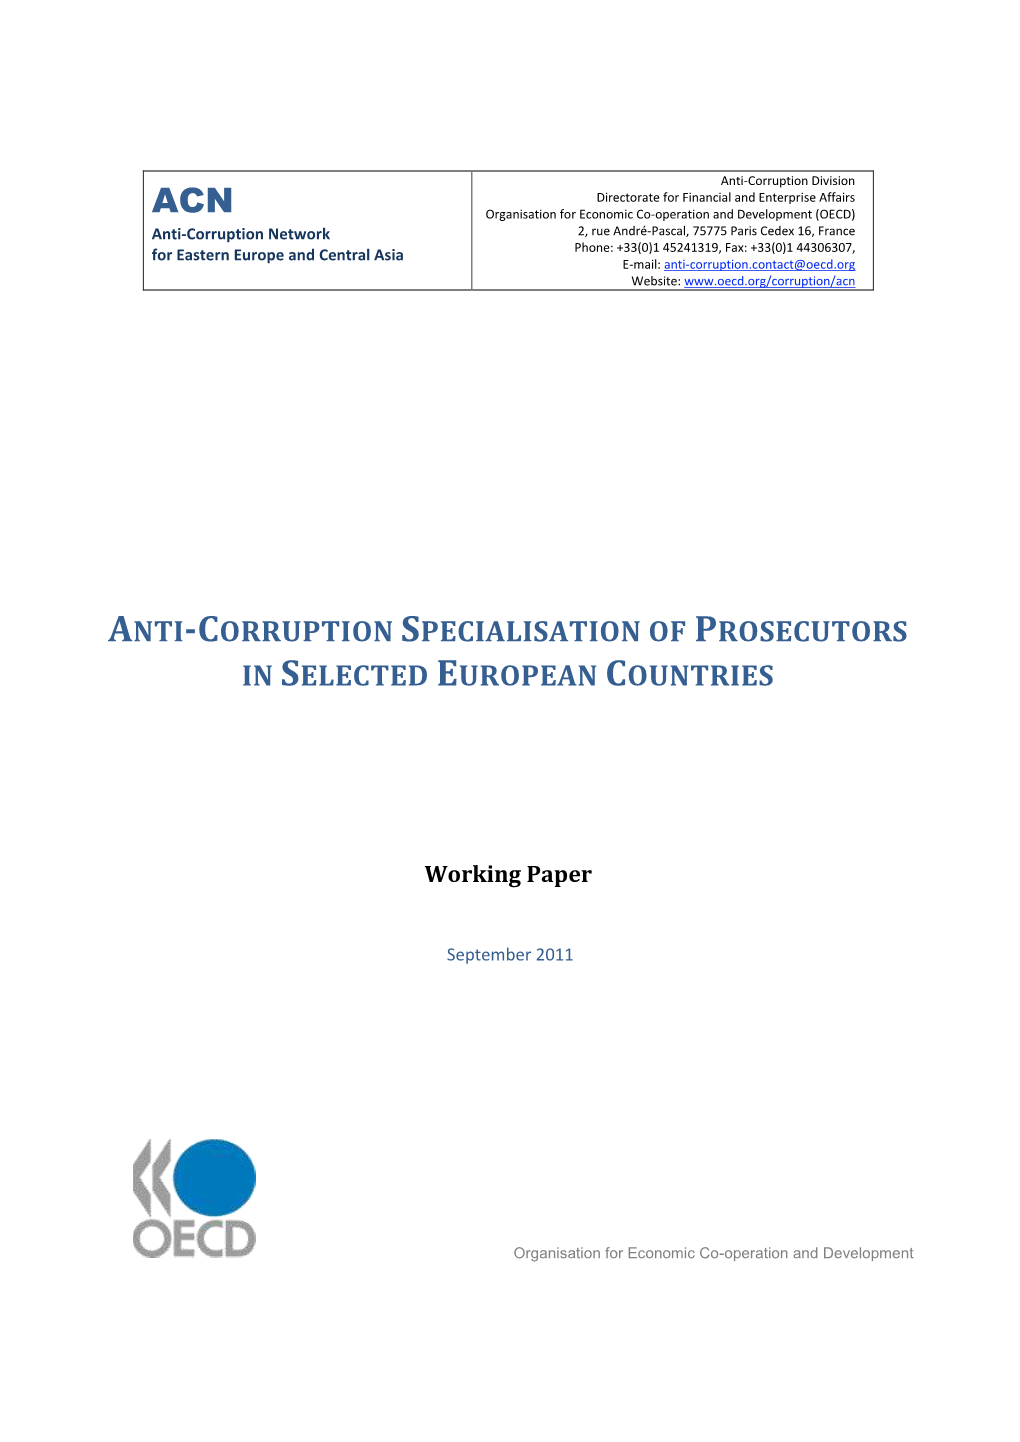 Anti-Corruption Specialisation of Prosecutors in Selected European Countries